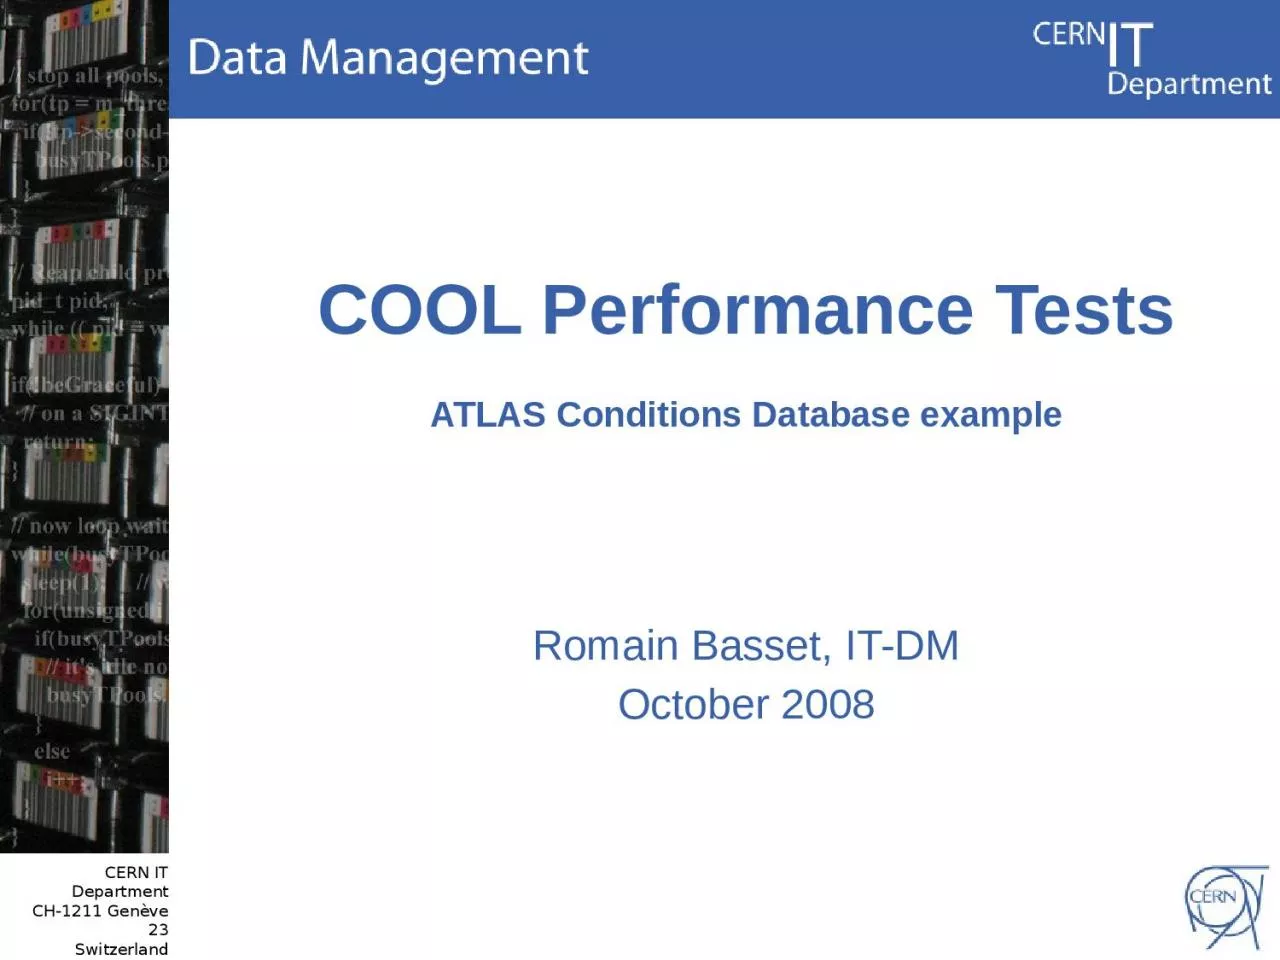 COOL Performance Tests